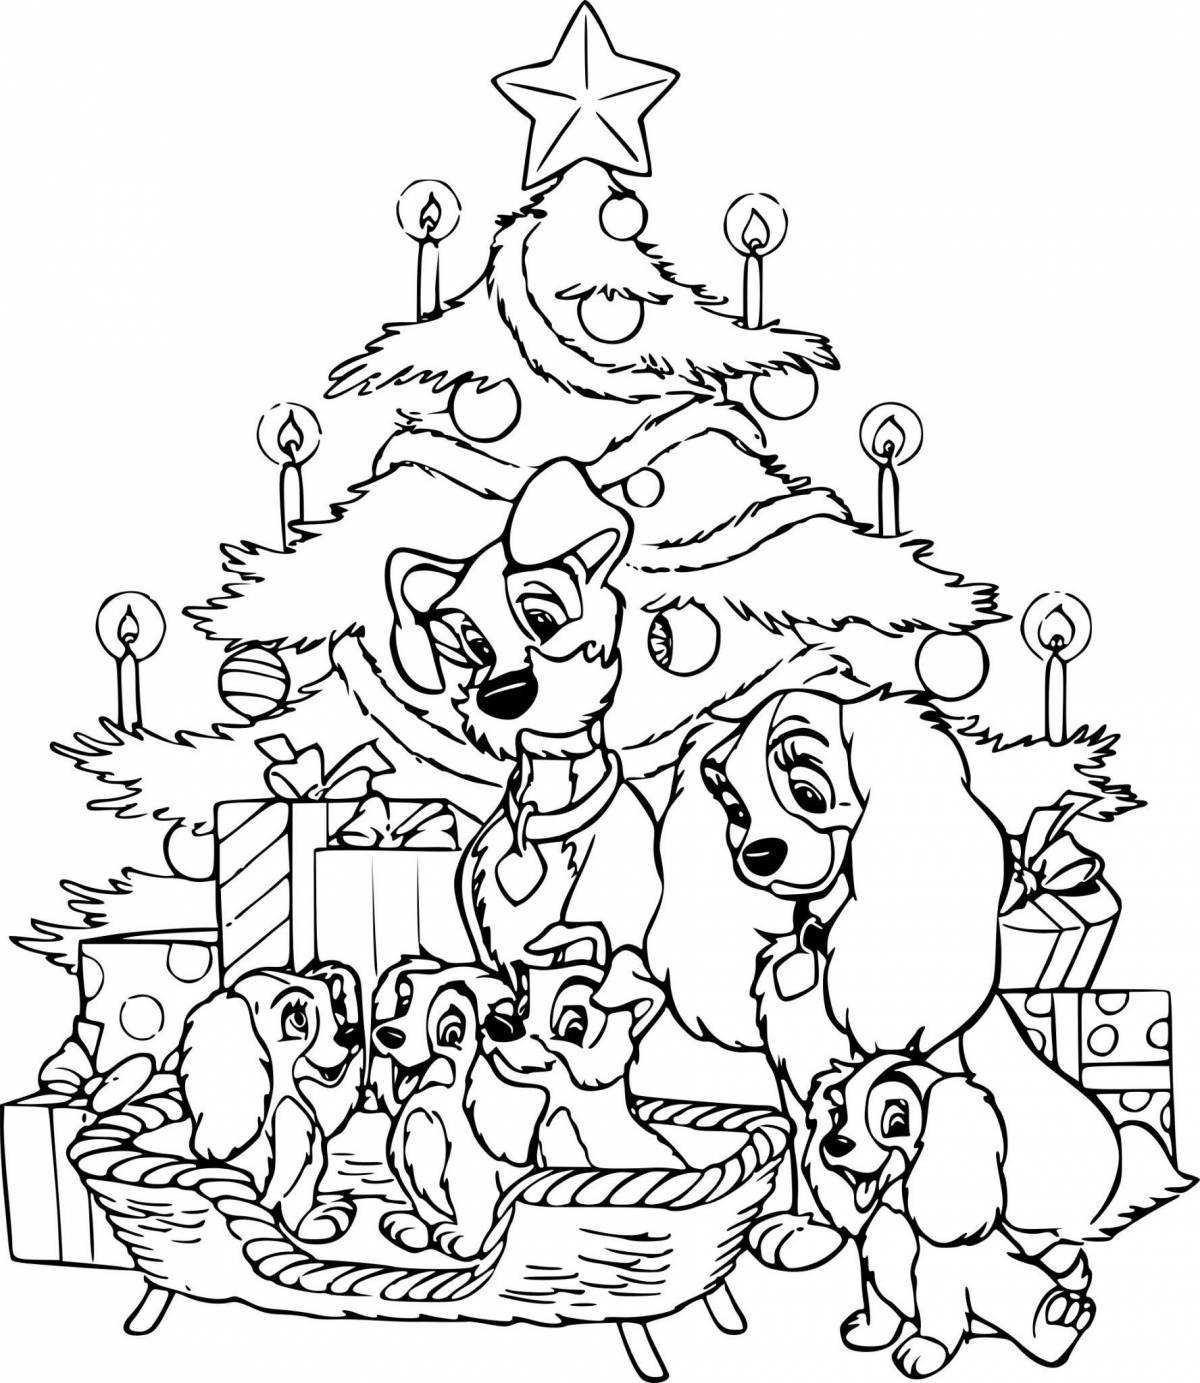 Coloring pages new 2020: wonderful and exotic